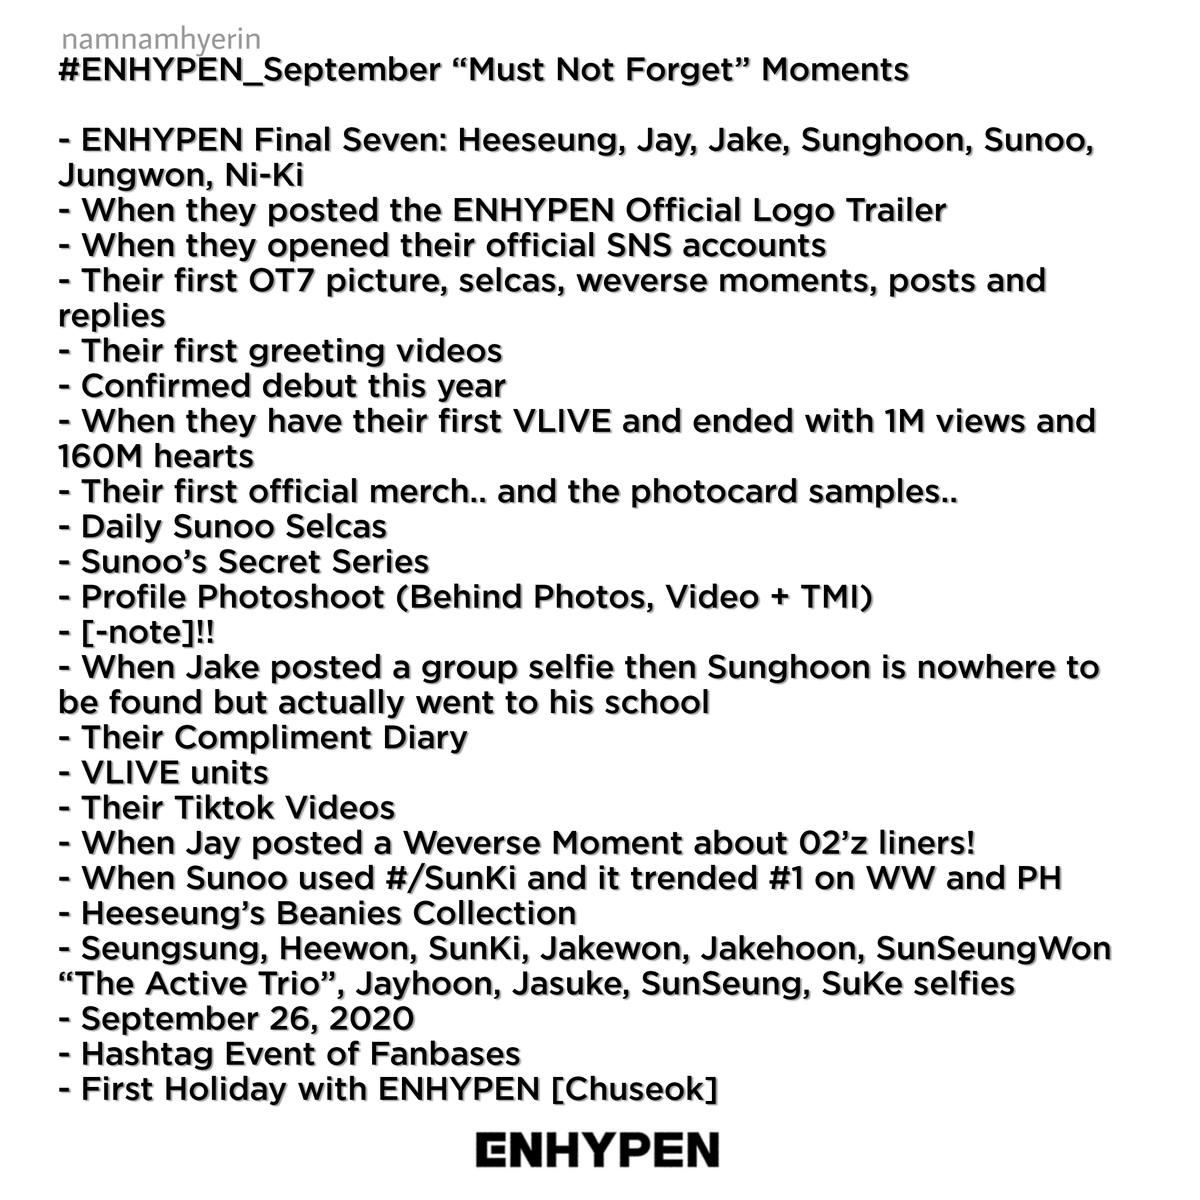  #ENHYPEN_September “Must Not Forget” Moments- ENHYPEN Final Seven: Heeseung, Jay, Jake, Sunghoon, Sunoo, Jungwon, Ni-Ki- When they posted the ENHYPEN Official Logo Trailer- When they opened their official SNS accounts